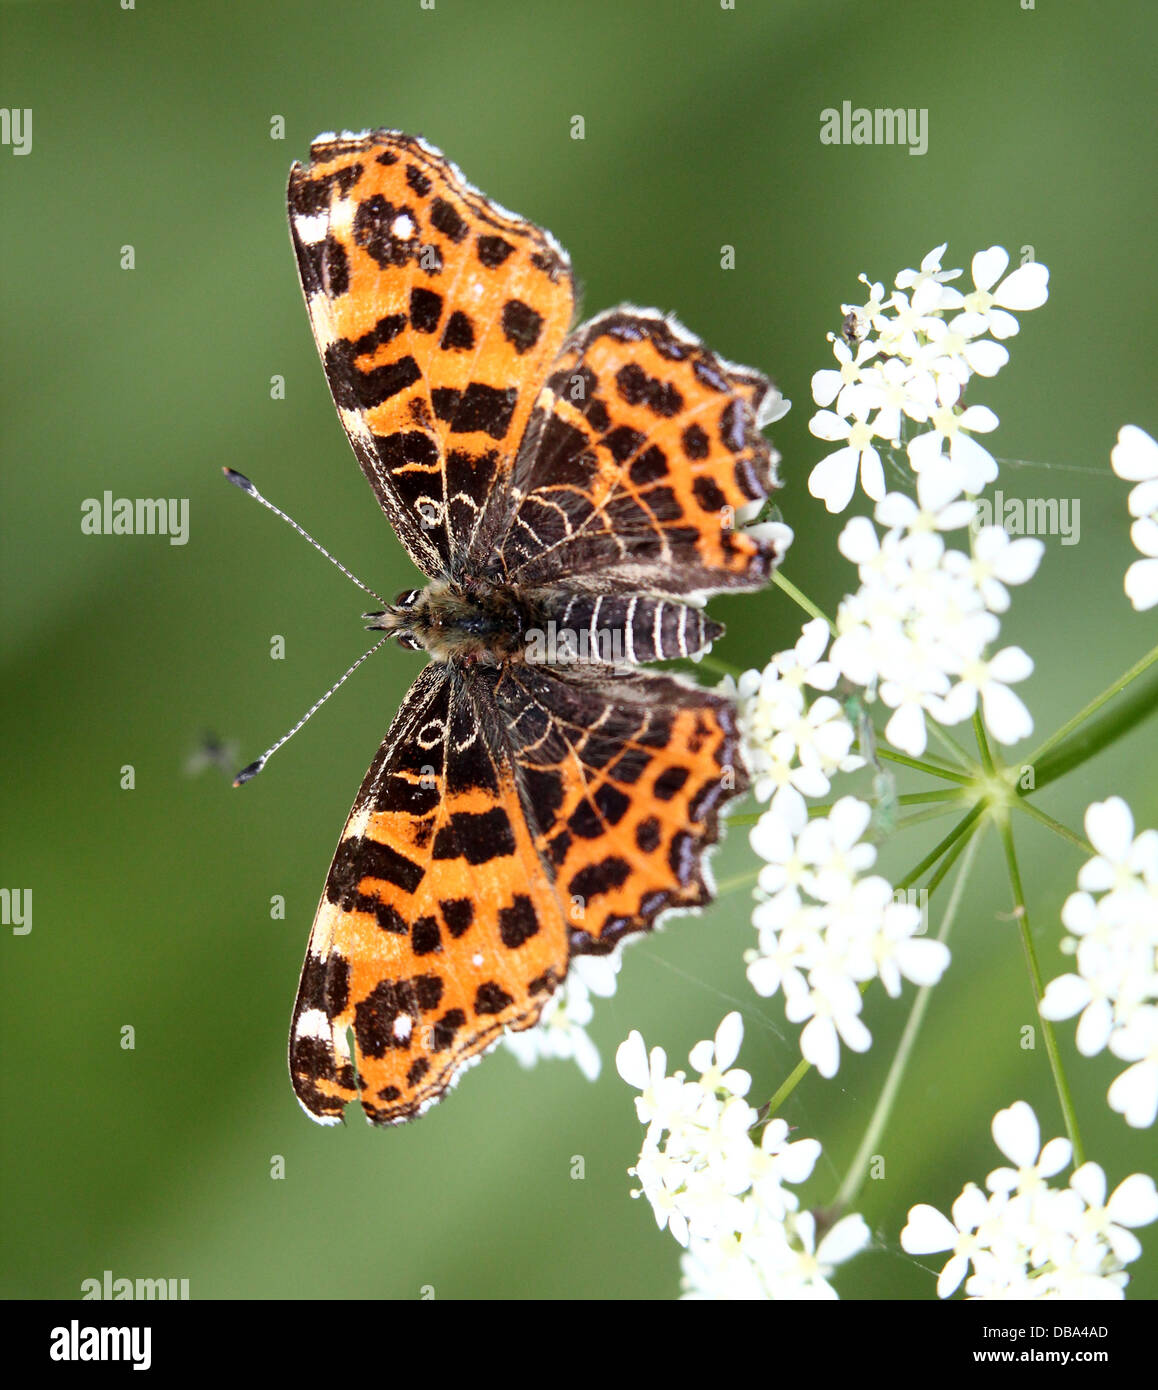 Close up  of a 1st generation Map Butterfly (Araschnia levana) posing on various flowers and on the ground - 45 images in series Stock Photo